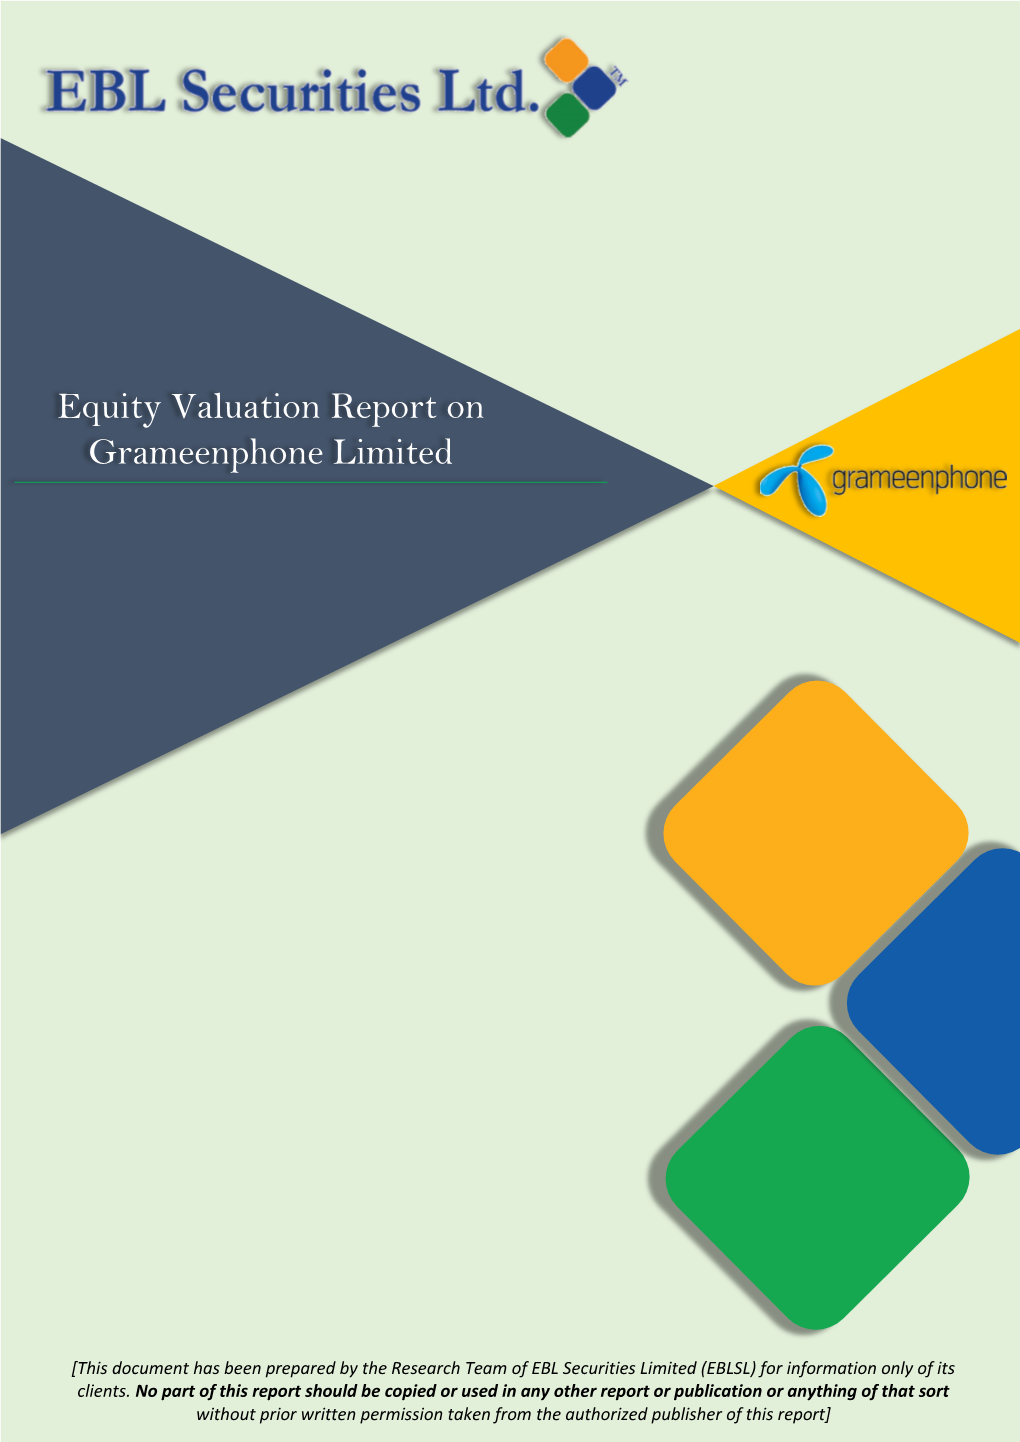 Equity Valuation Report on Grameenphone Limited